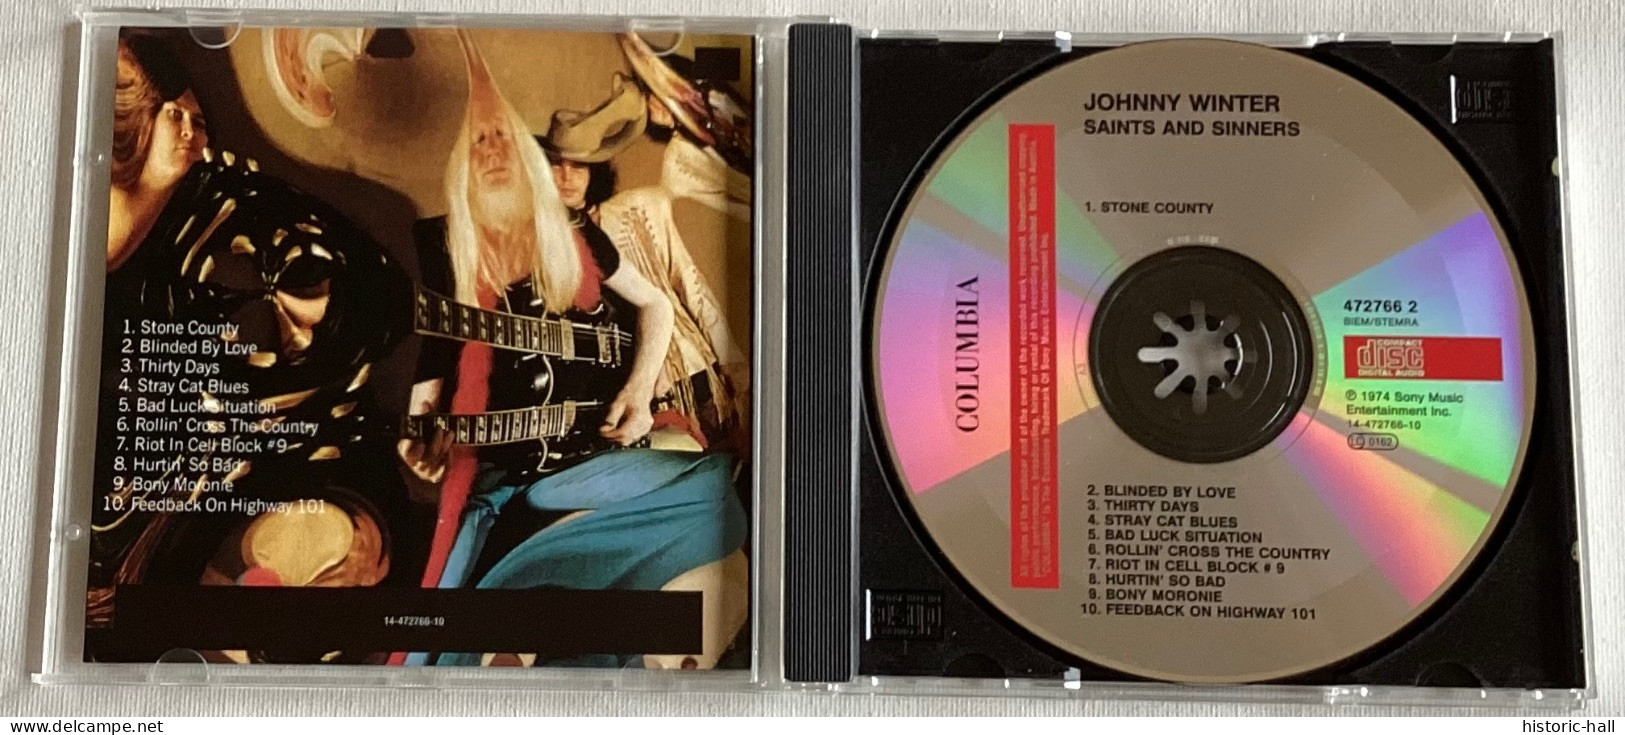 JOHNNY WINTER - Saints And Sinners - CD - 1974 - Blues